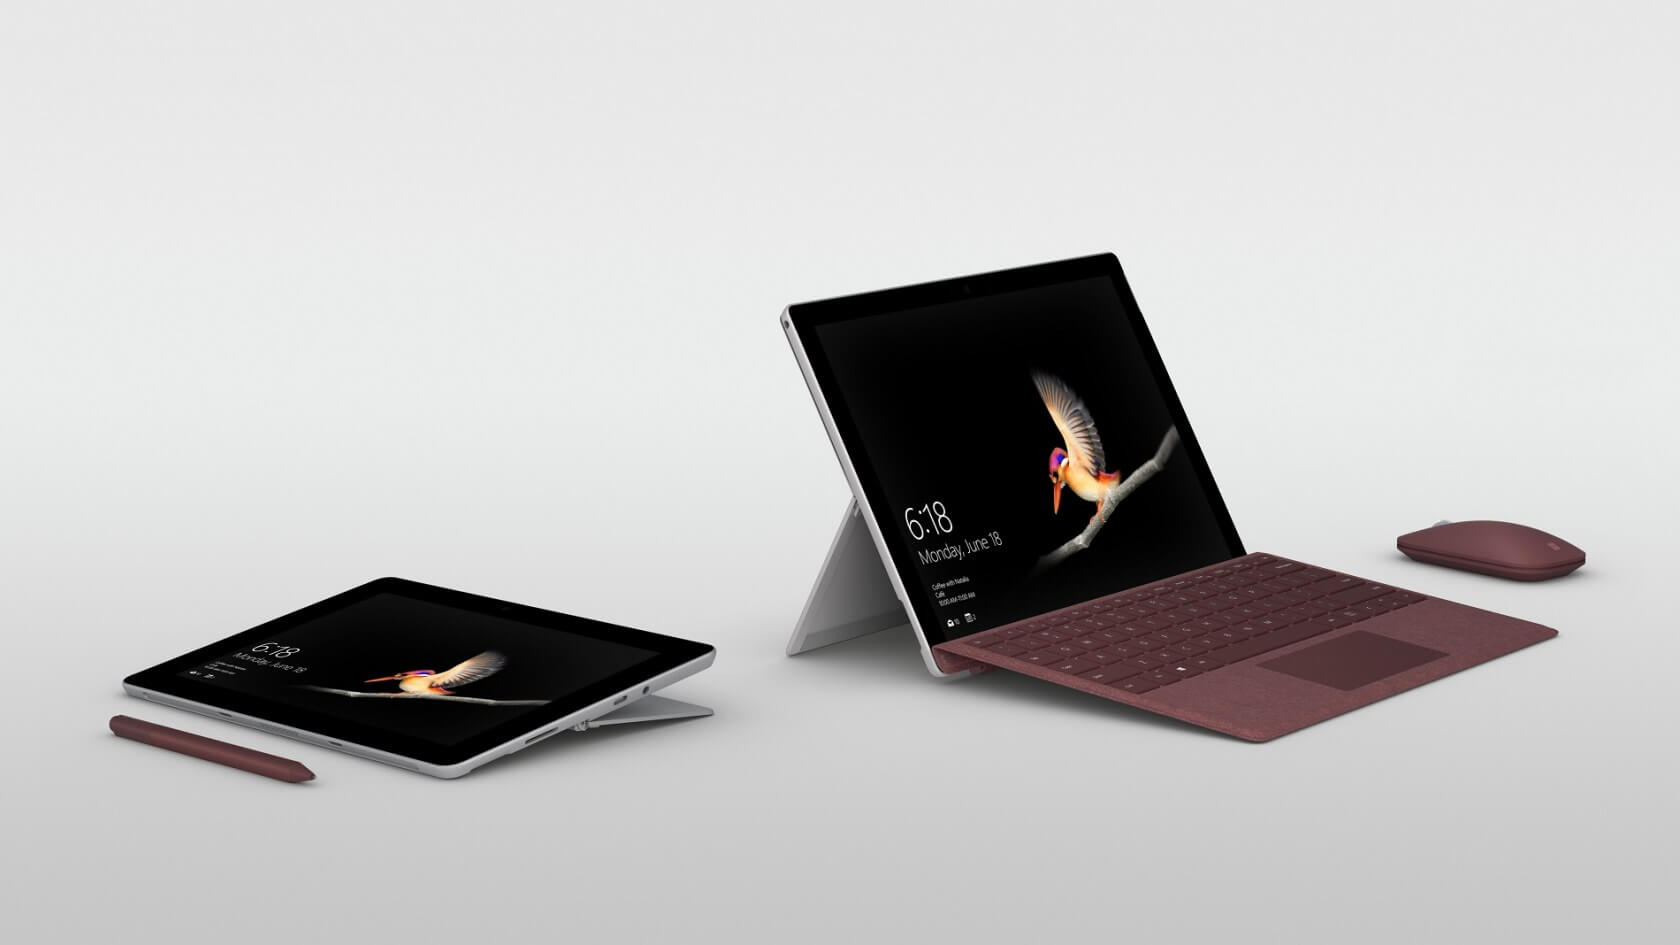 Intel reportedly petitioned Microsoft to avoid using ARM chips in the Surface Go